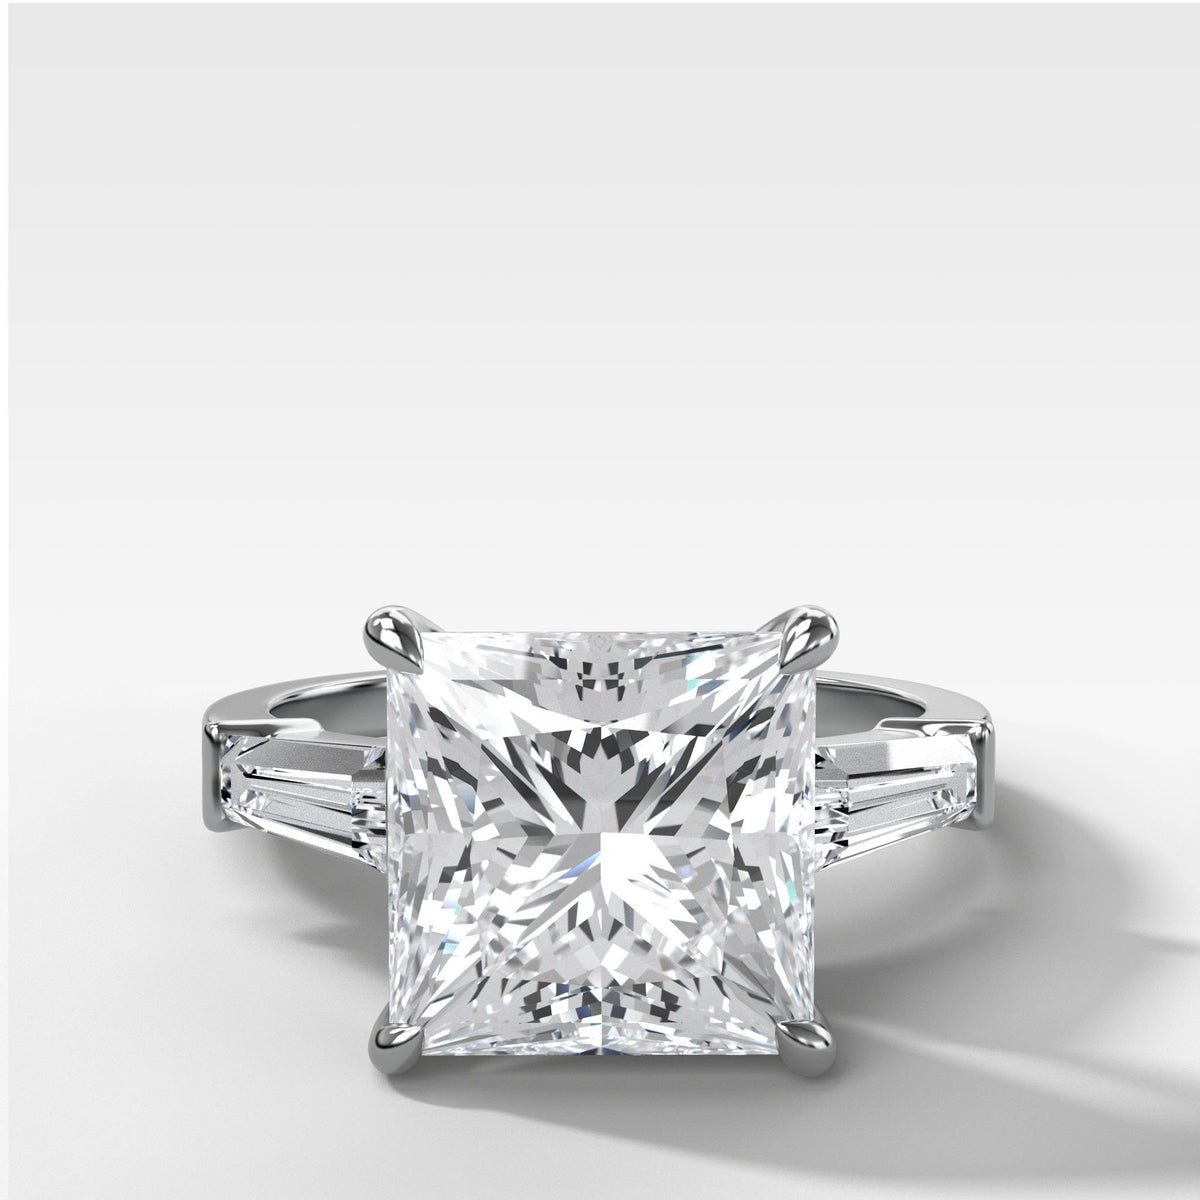 Translunar Tapered Baguette Engagement Ring With Princess Cut by Good Stone in White Gold